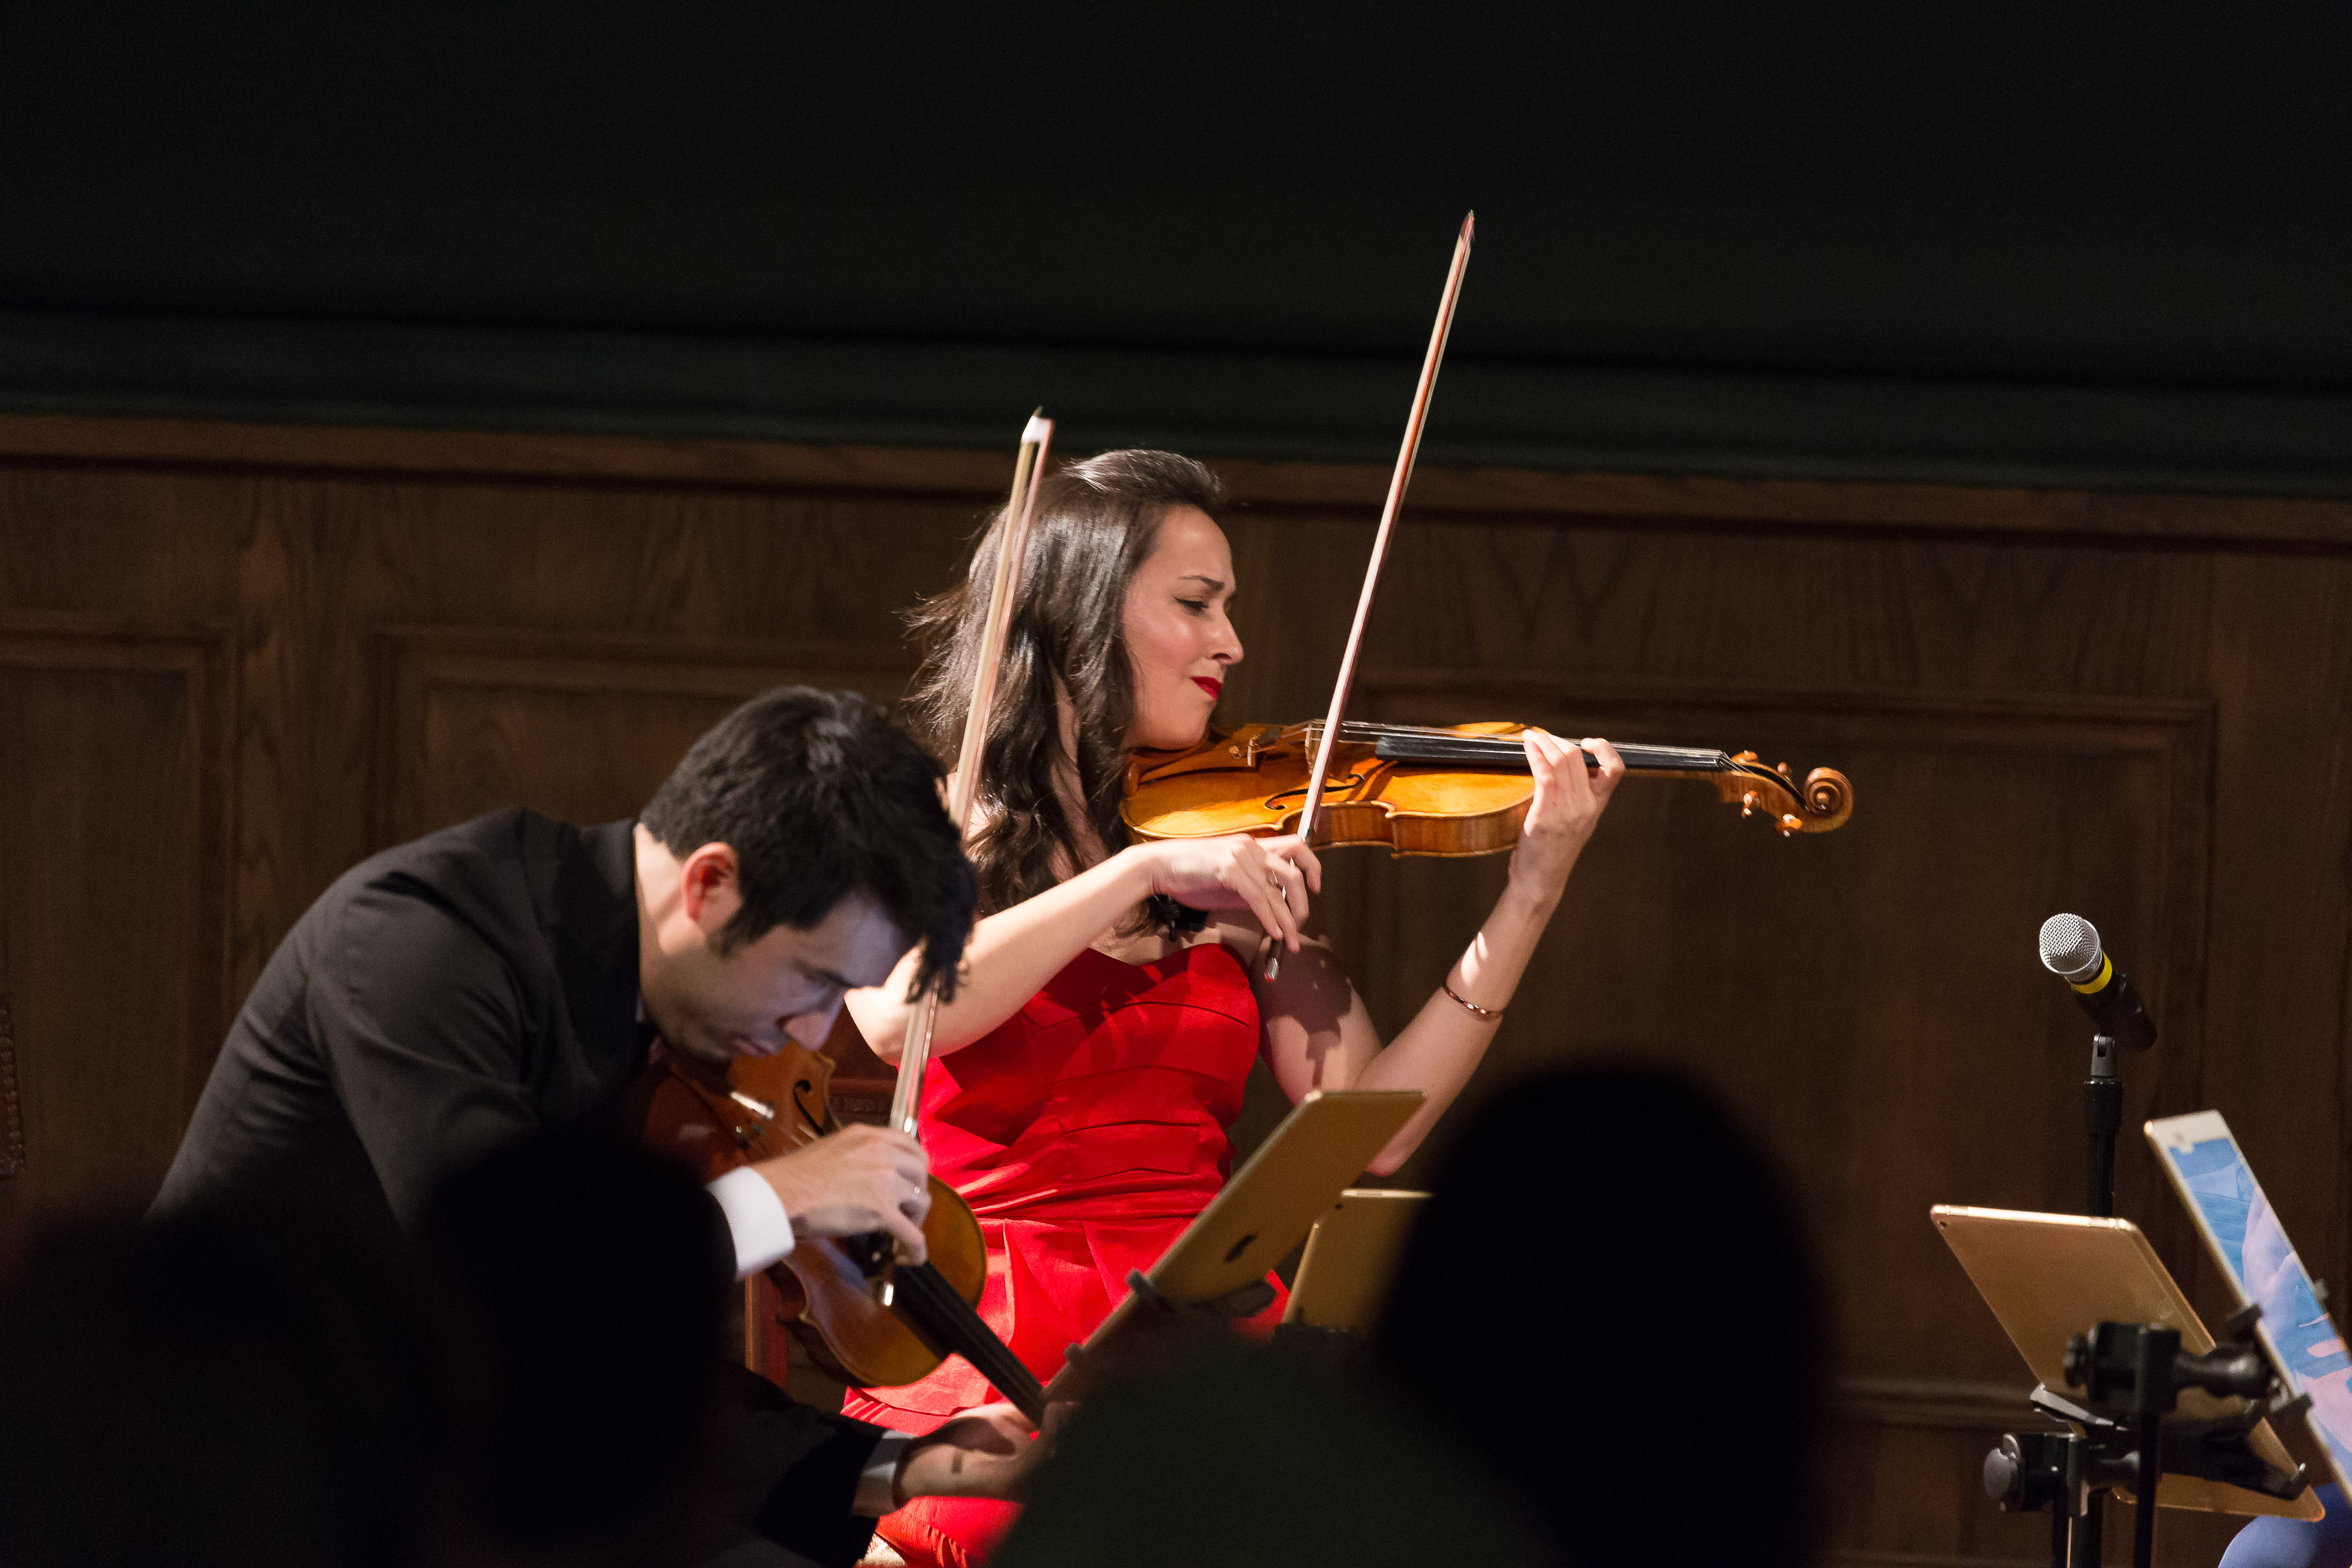 A man and a woman playing violins at a concert